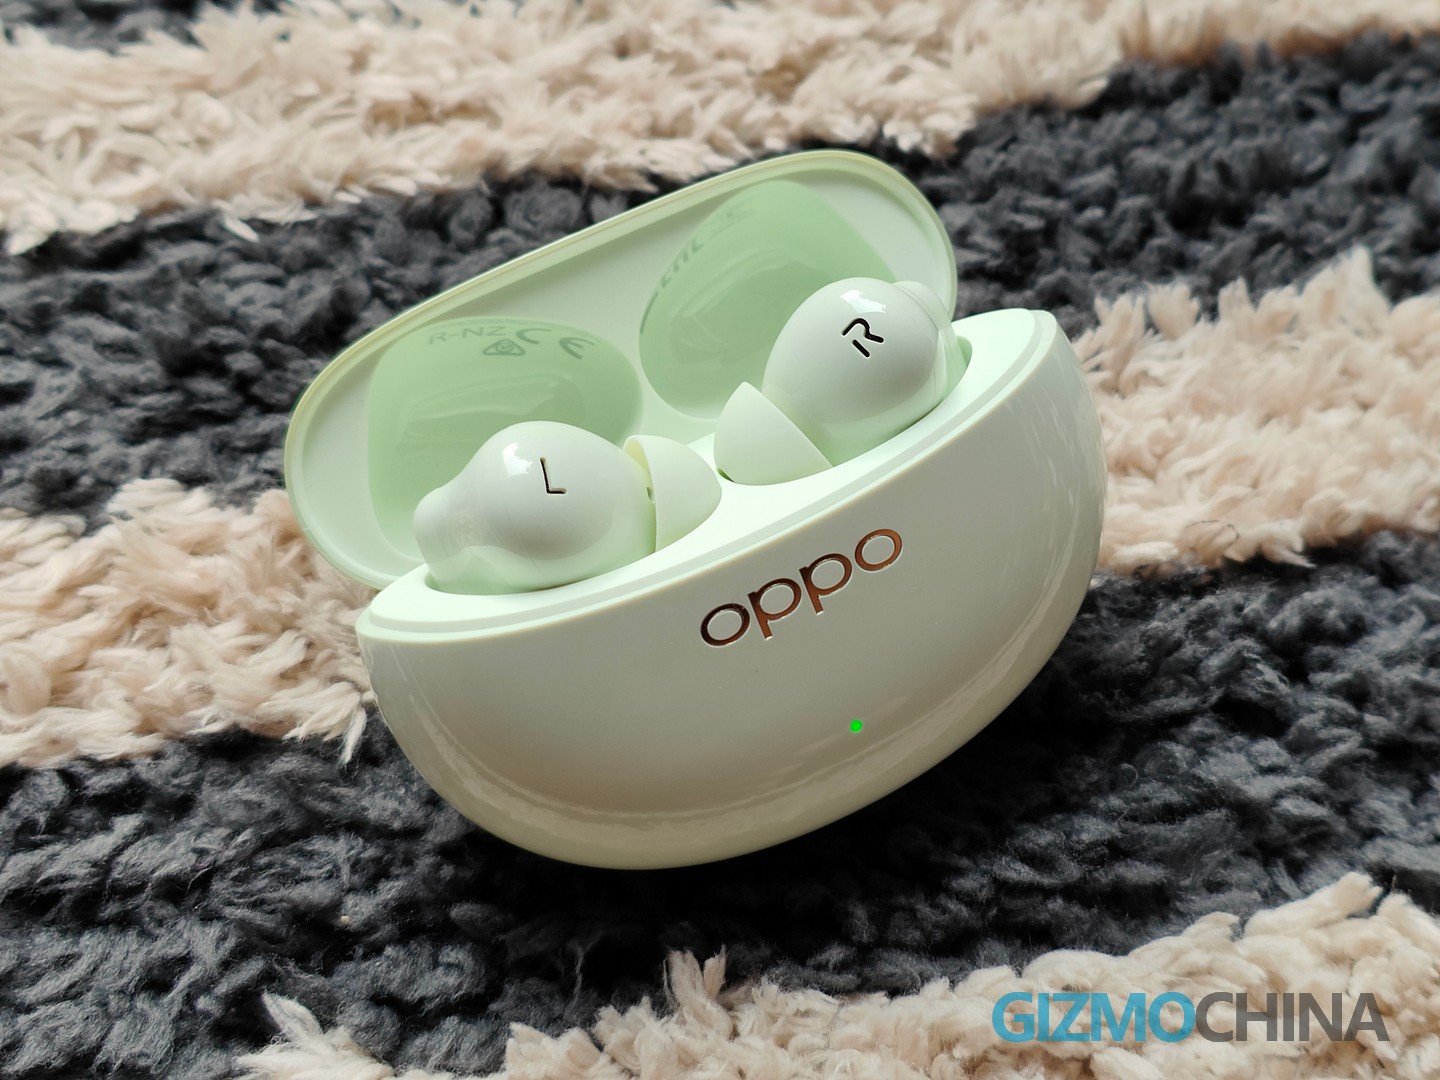 Oppo brings premium bamboo-fibre ANC earbuds to the Enco Air3 Pro